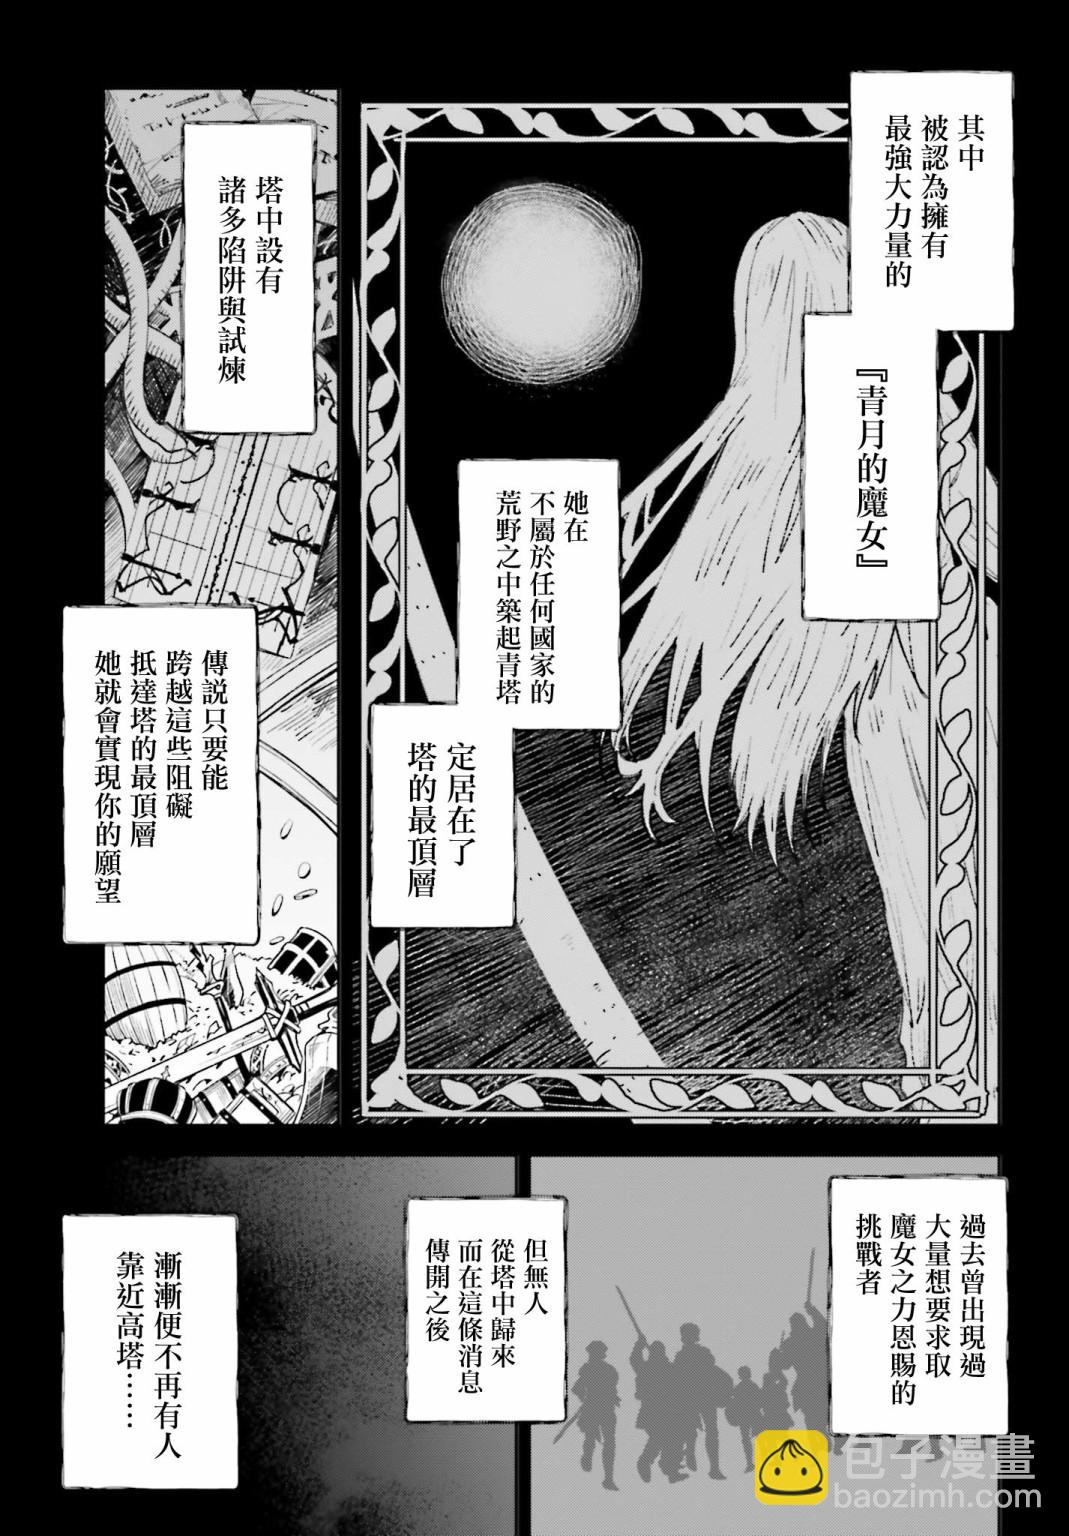 Unnamed Memory - 第01话(1/2) - 3